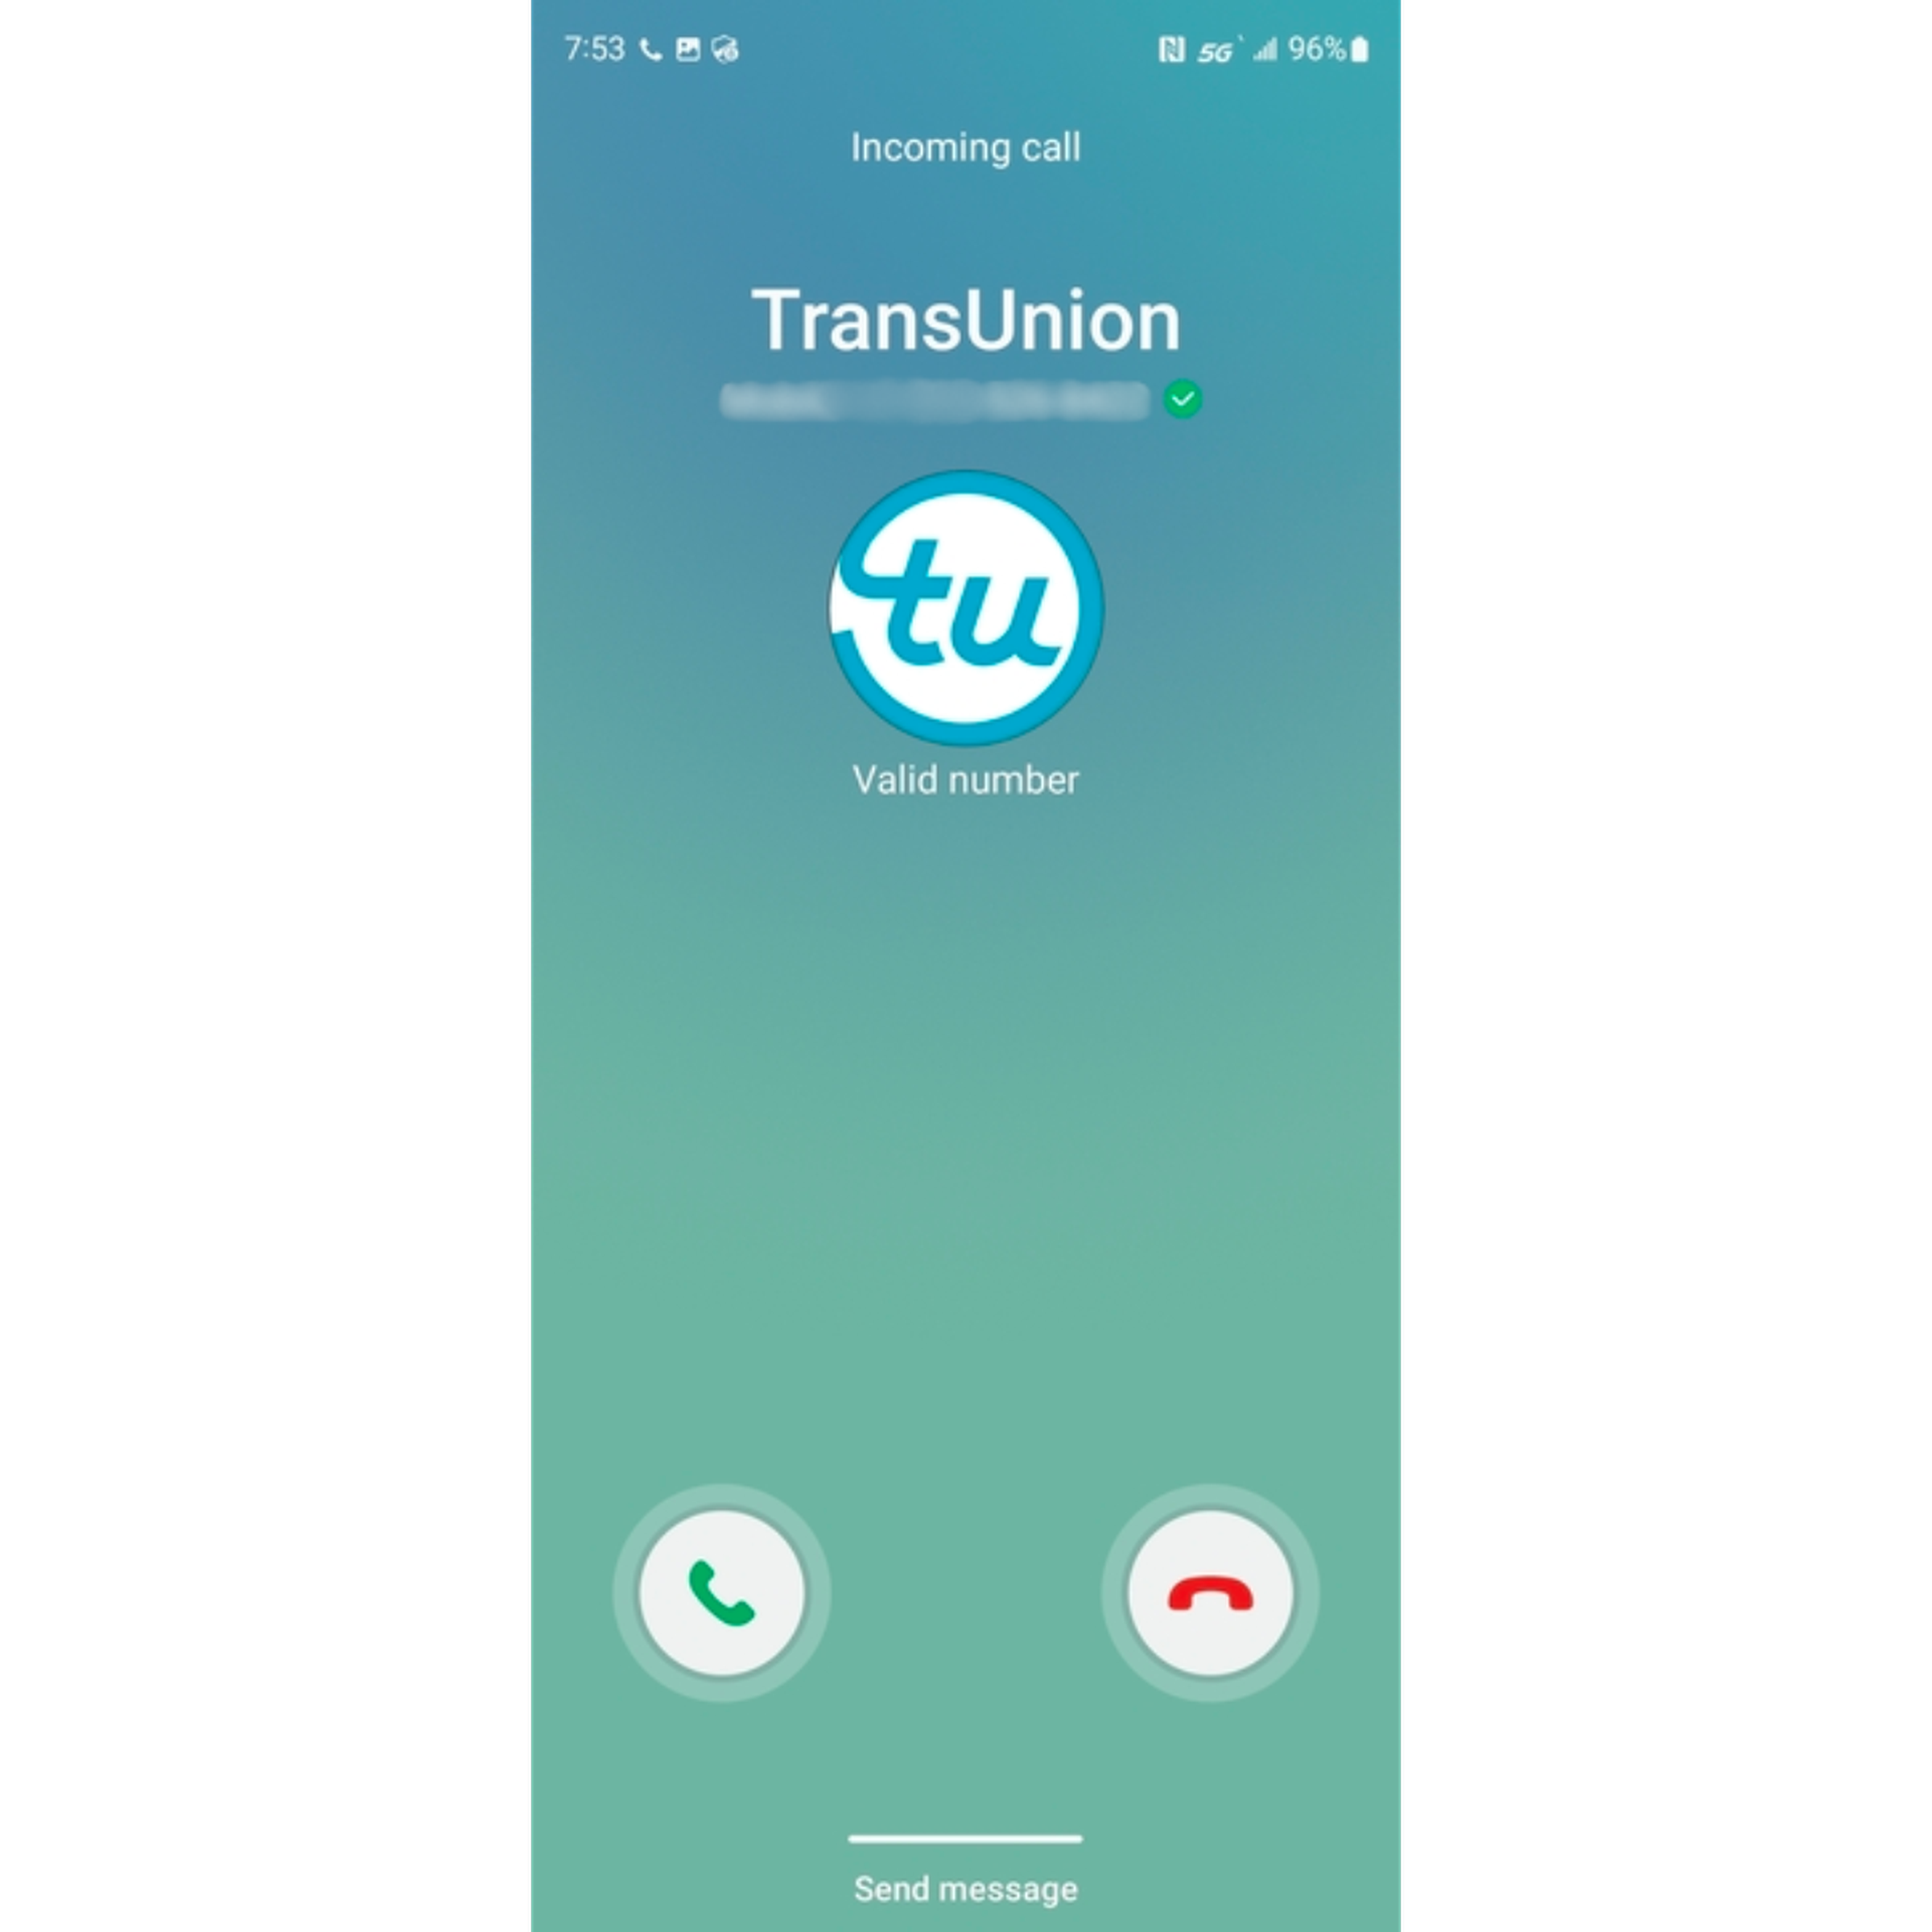 An image of a cell phone screen shows a call from TransUnion that shows the company’s name and logo.